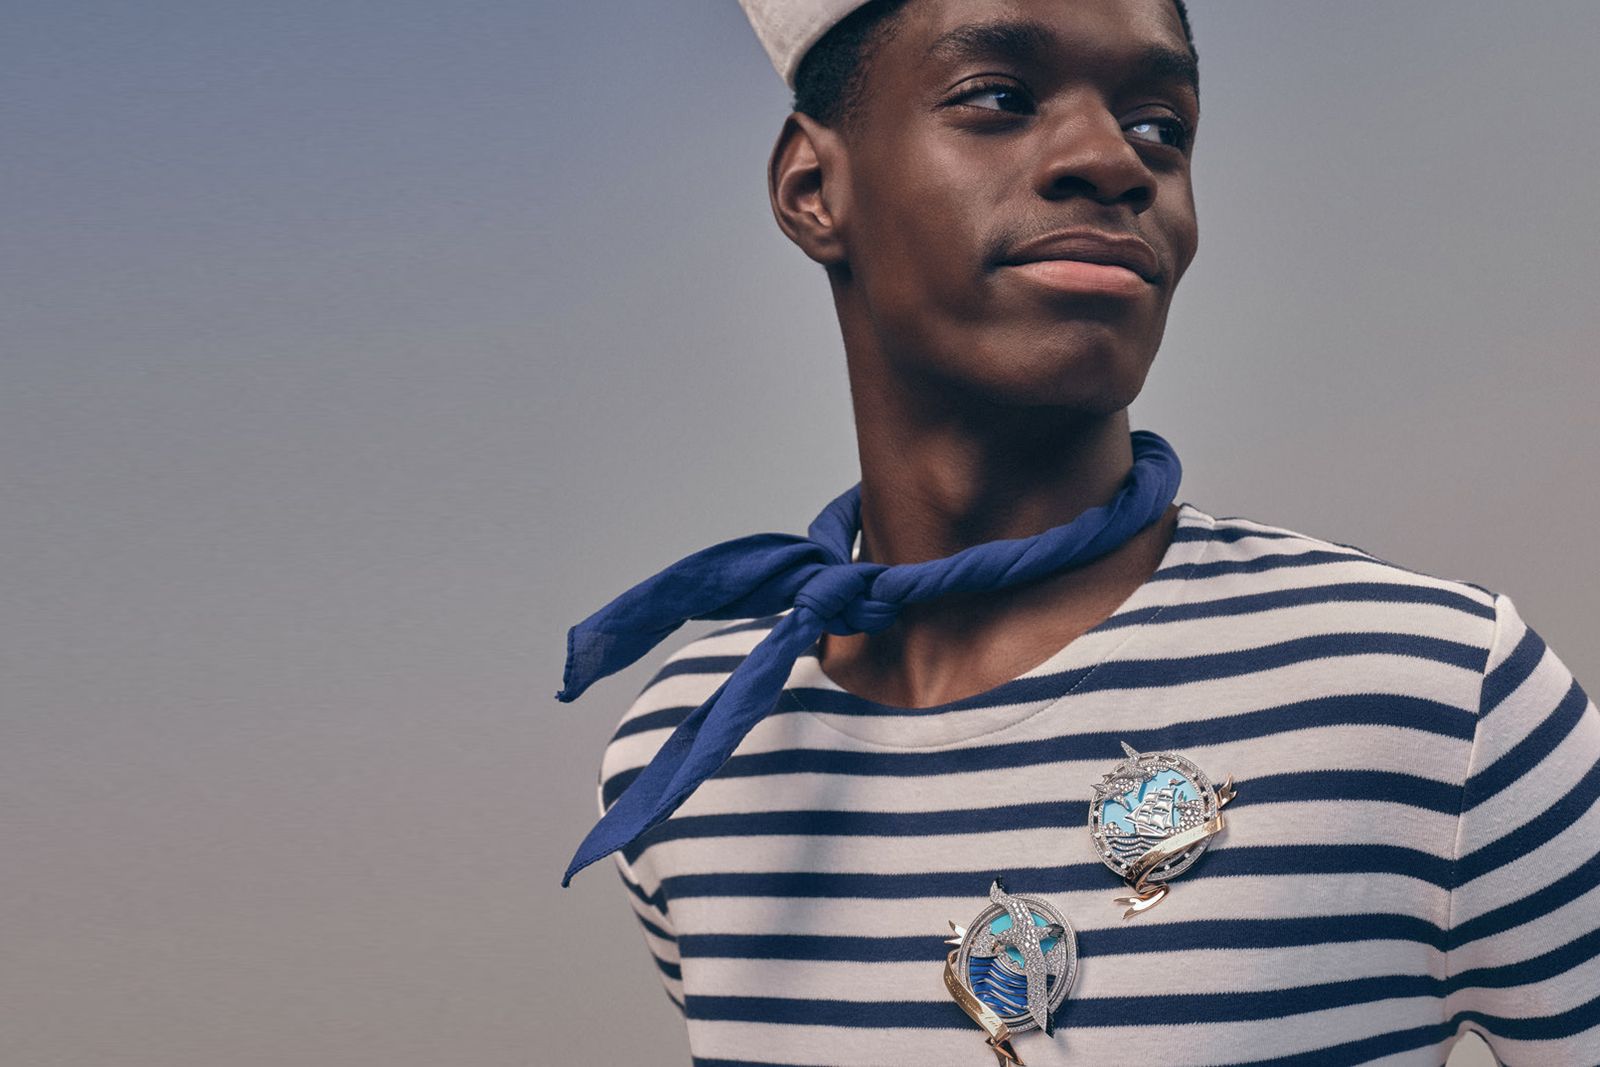 High Jewellery for Men is Here to Stay